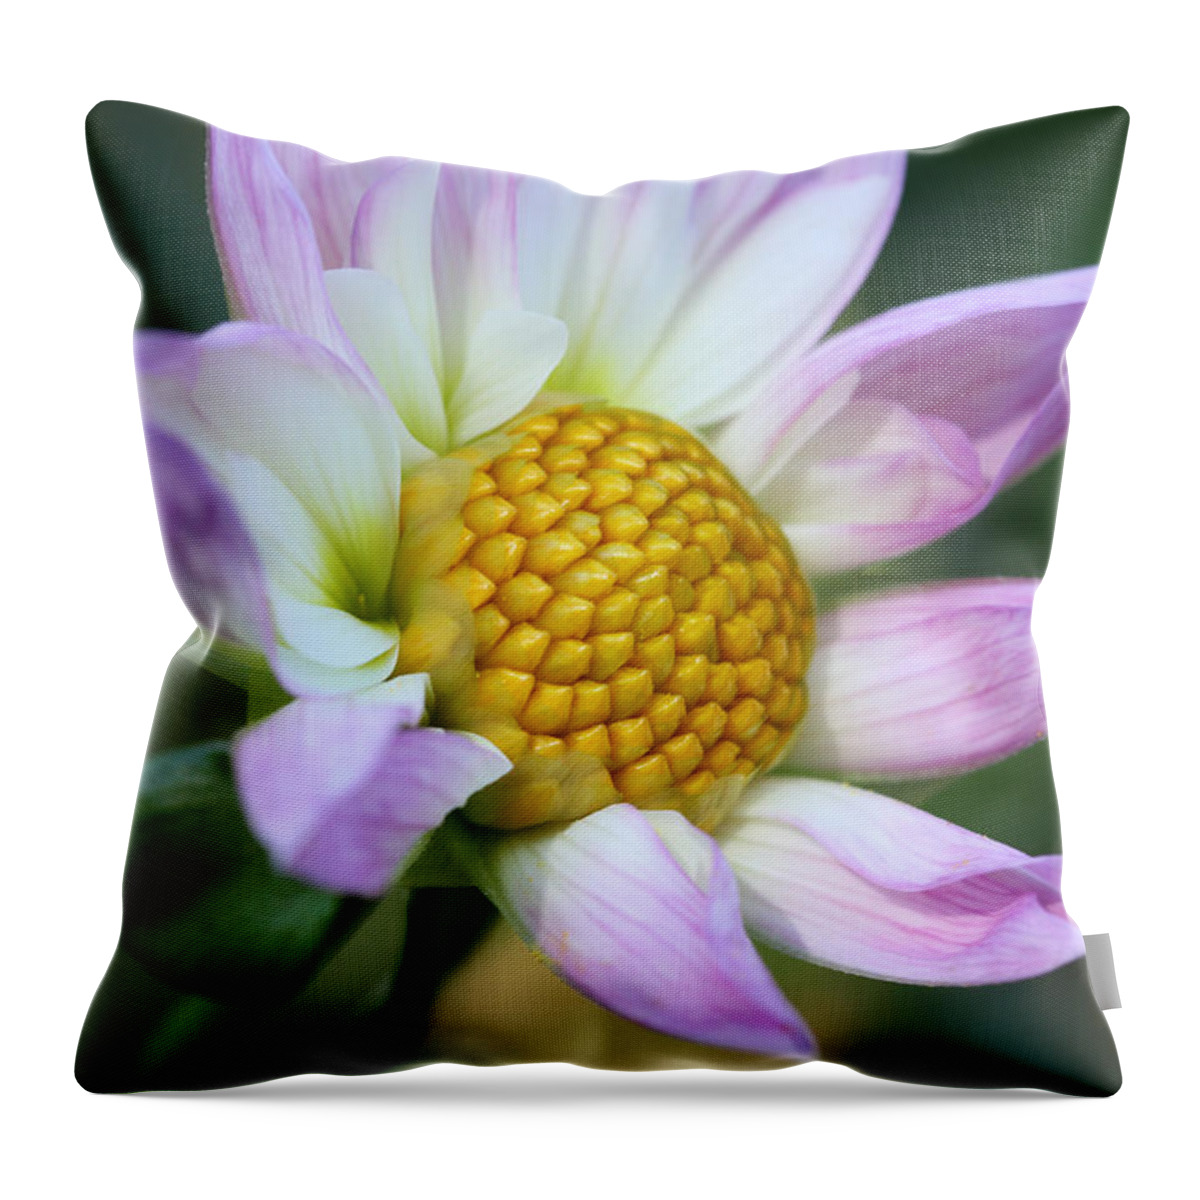 Connie Handscomb Throw Pillow featuring the photograph Fresh As A Dahlia by Connie Handscomb